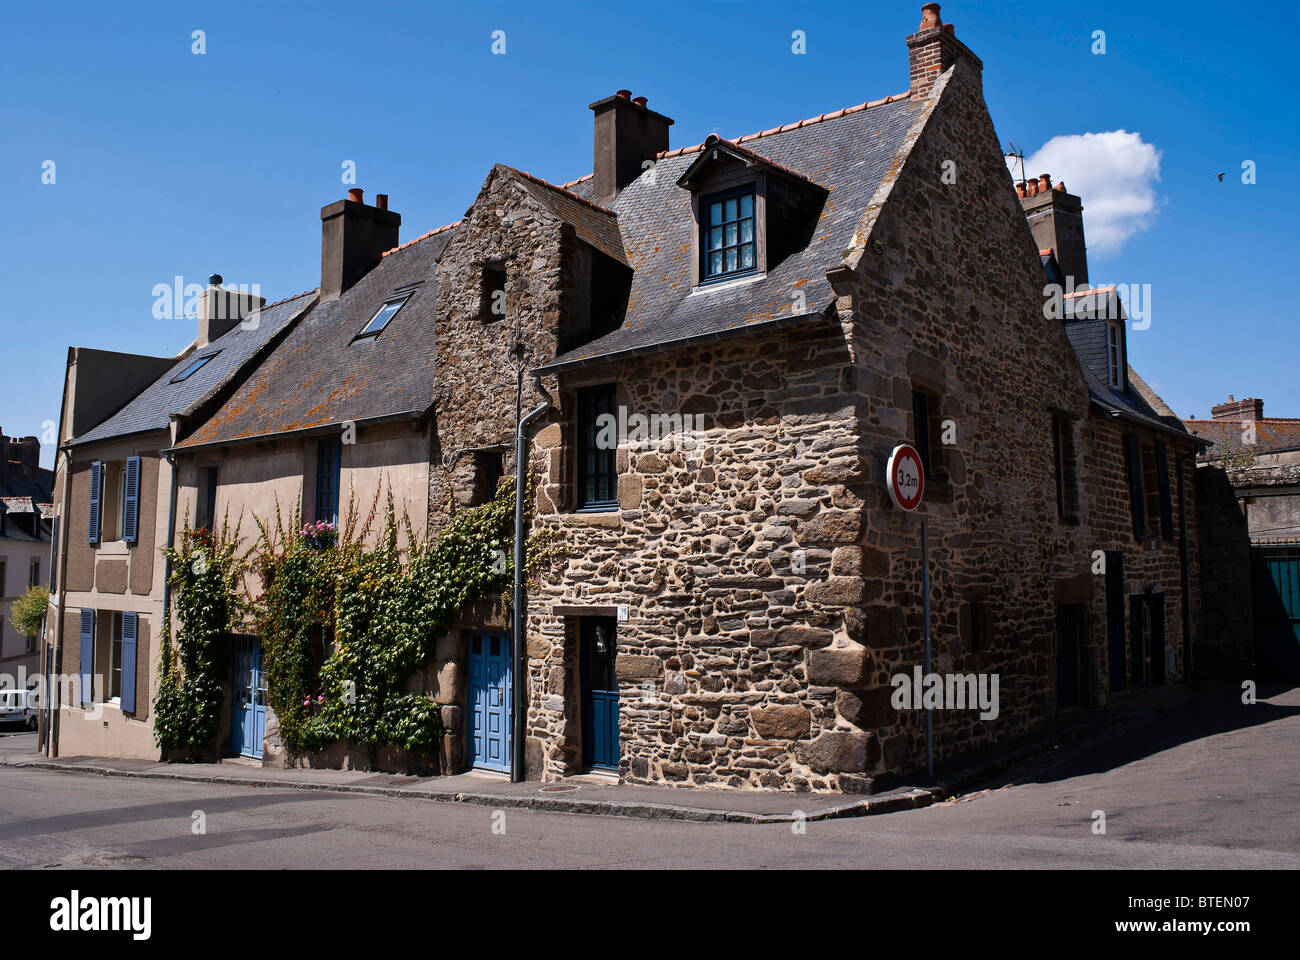 French Brittany Typical House Stock Photo - Download Image Now